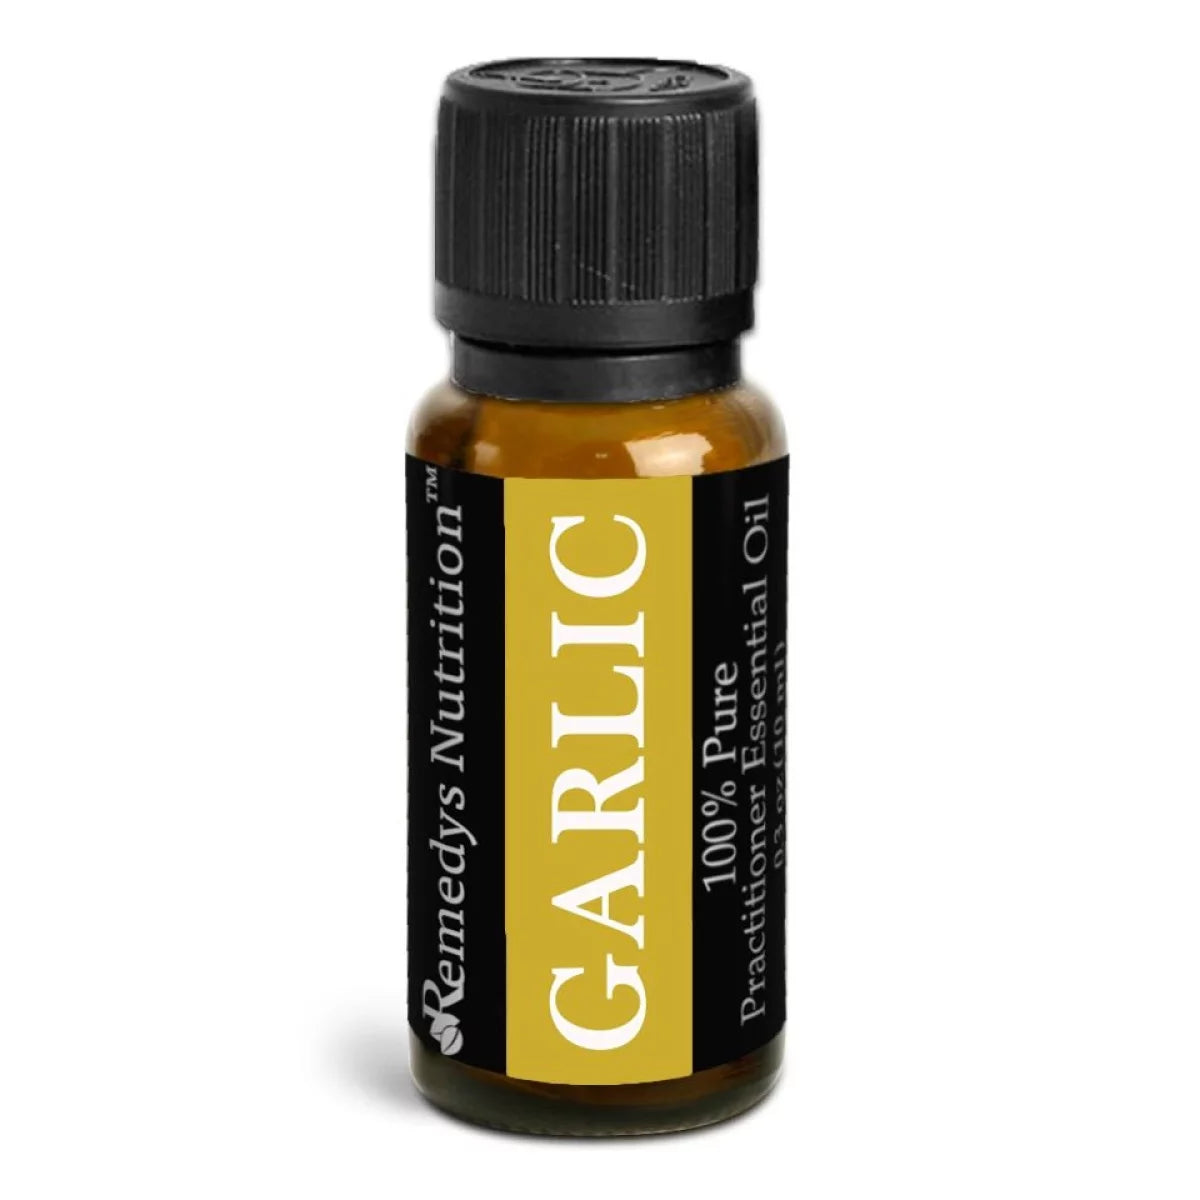 Image of Remedy's Nutrition® Garlic Essential Oil Herbal Supplement front bottle. 